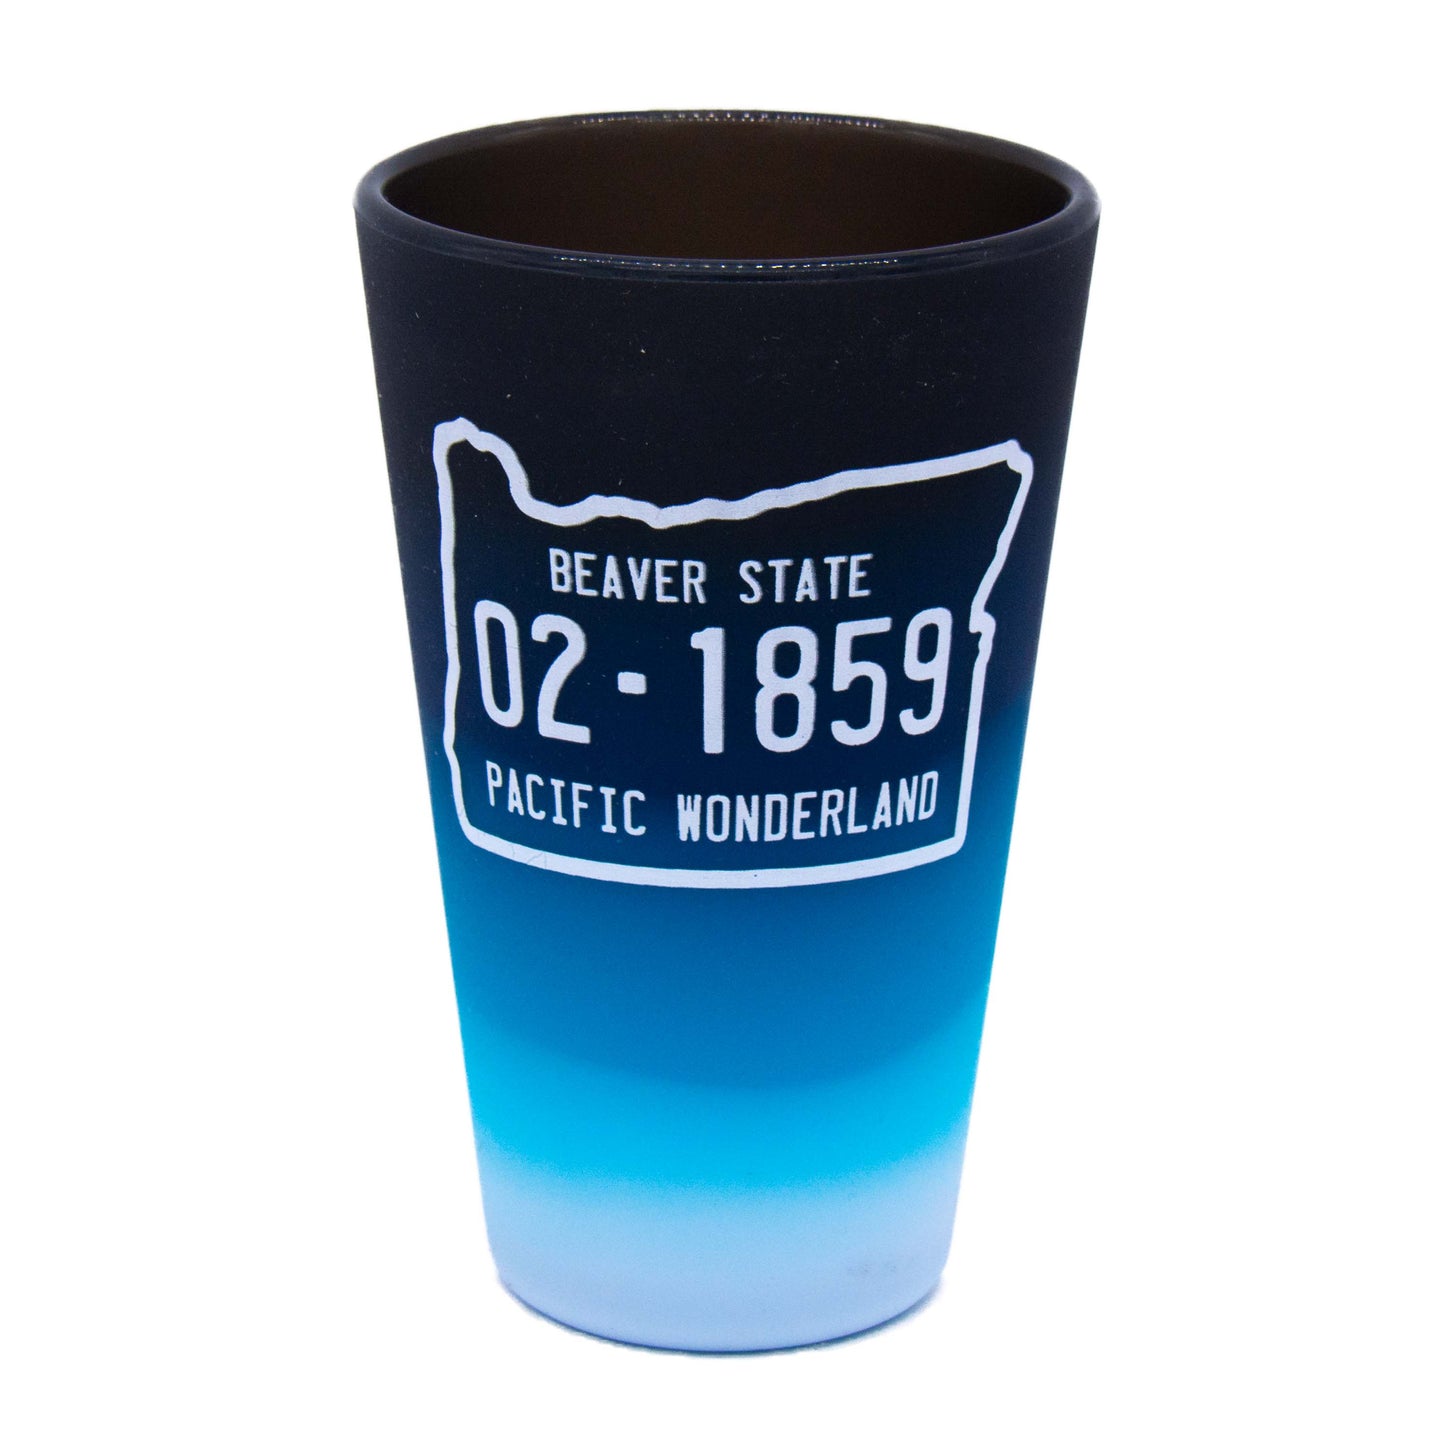 This pint glass is made with silicon and is silk-screened with the shape of Oregon.  The graphic mimics the state's Pacific Wonderland license plates with numbers to represent Oregon's entry to the union in February 1859